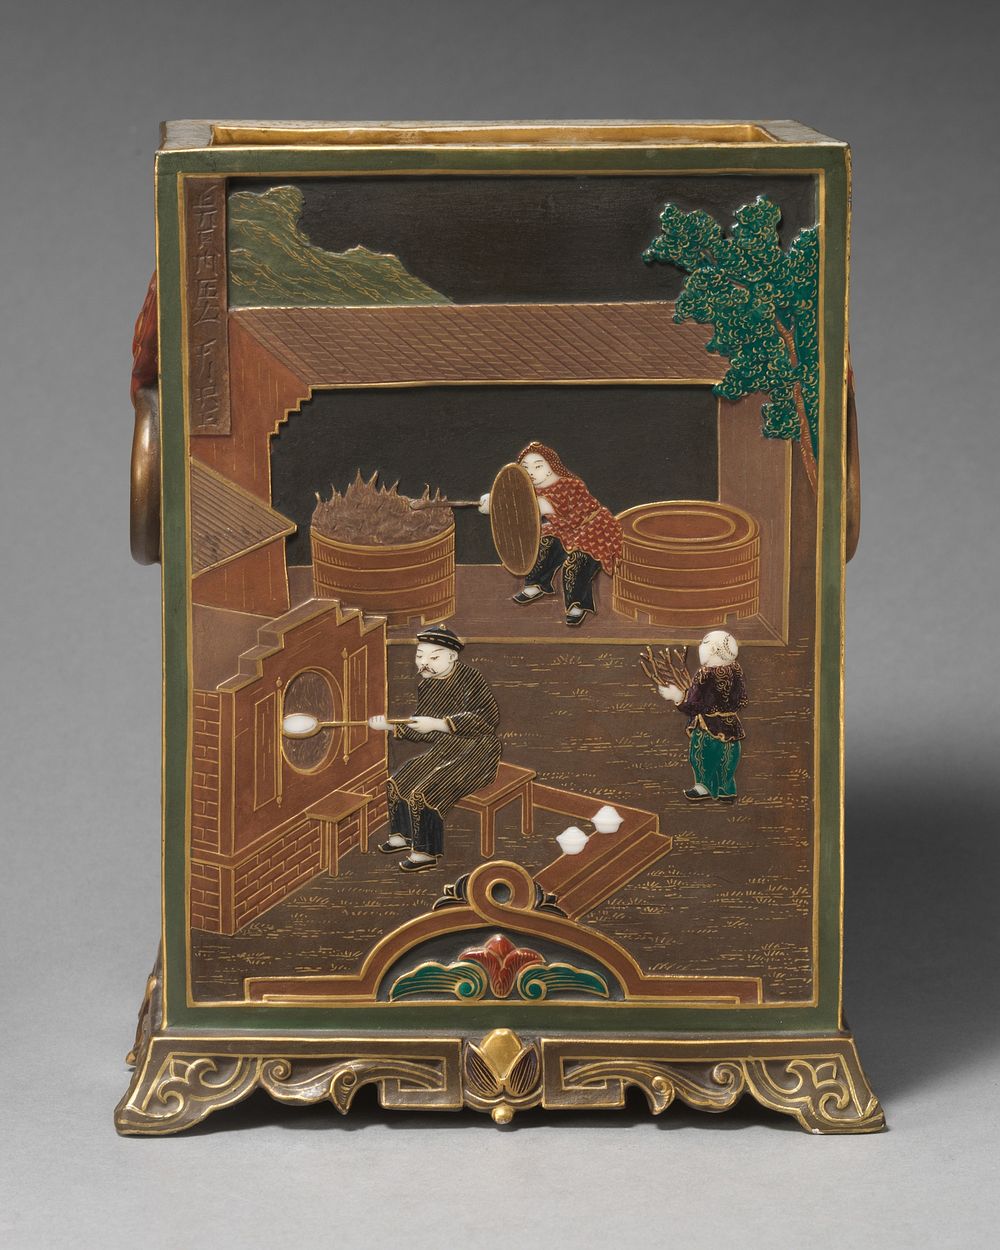 Rectangular vase with porcelain-making scenes ("the oven for burning clay" and "the painting of the wares")